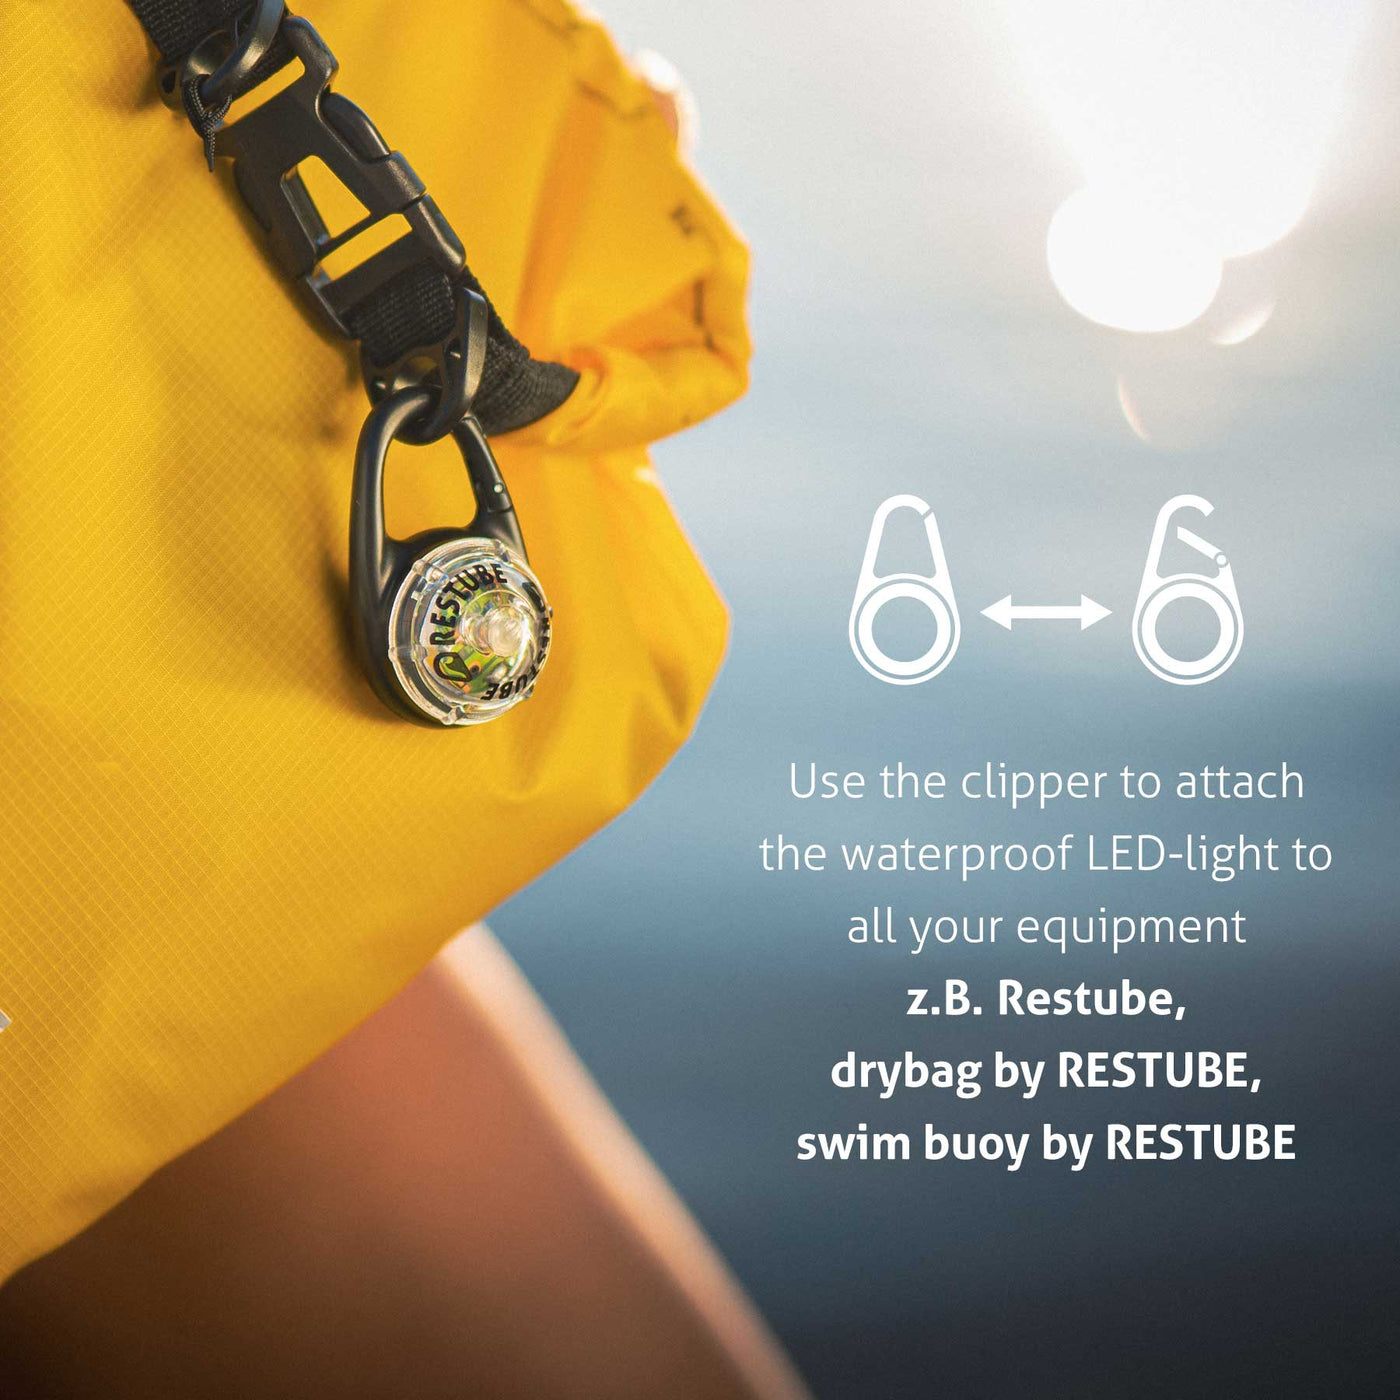 Use the clipper to attach the waterproof LED-light to all your equipment for example Restube, drybag by Restube or swim buoy by Restube